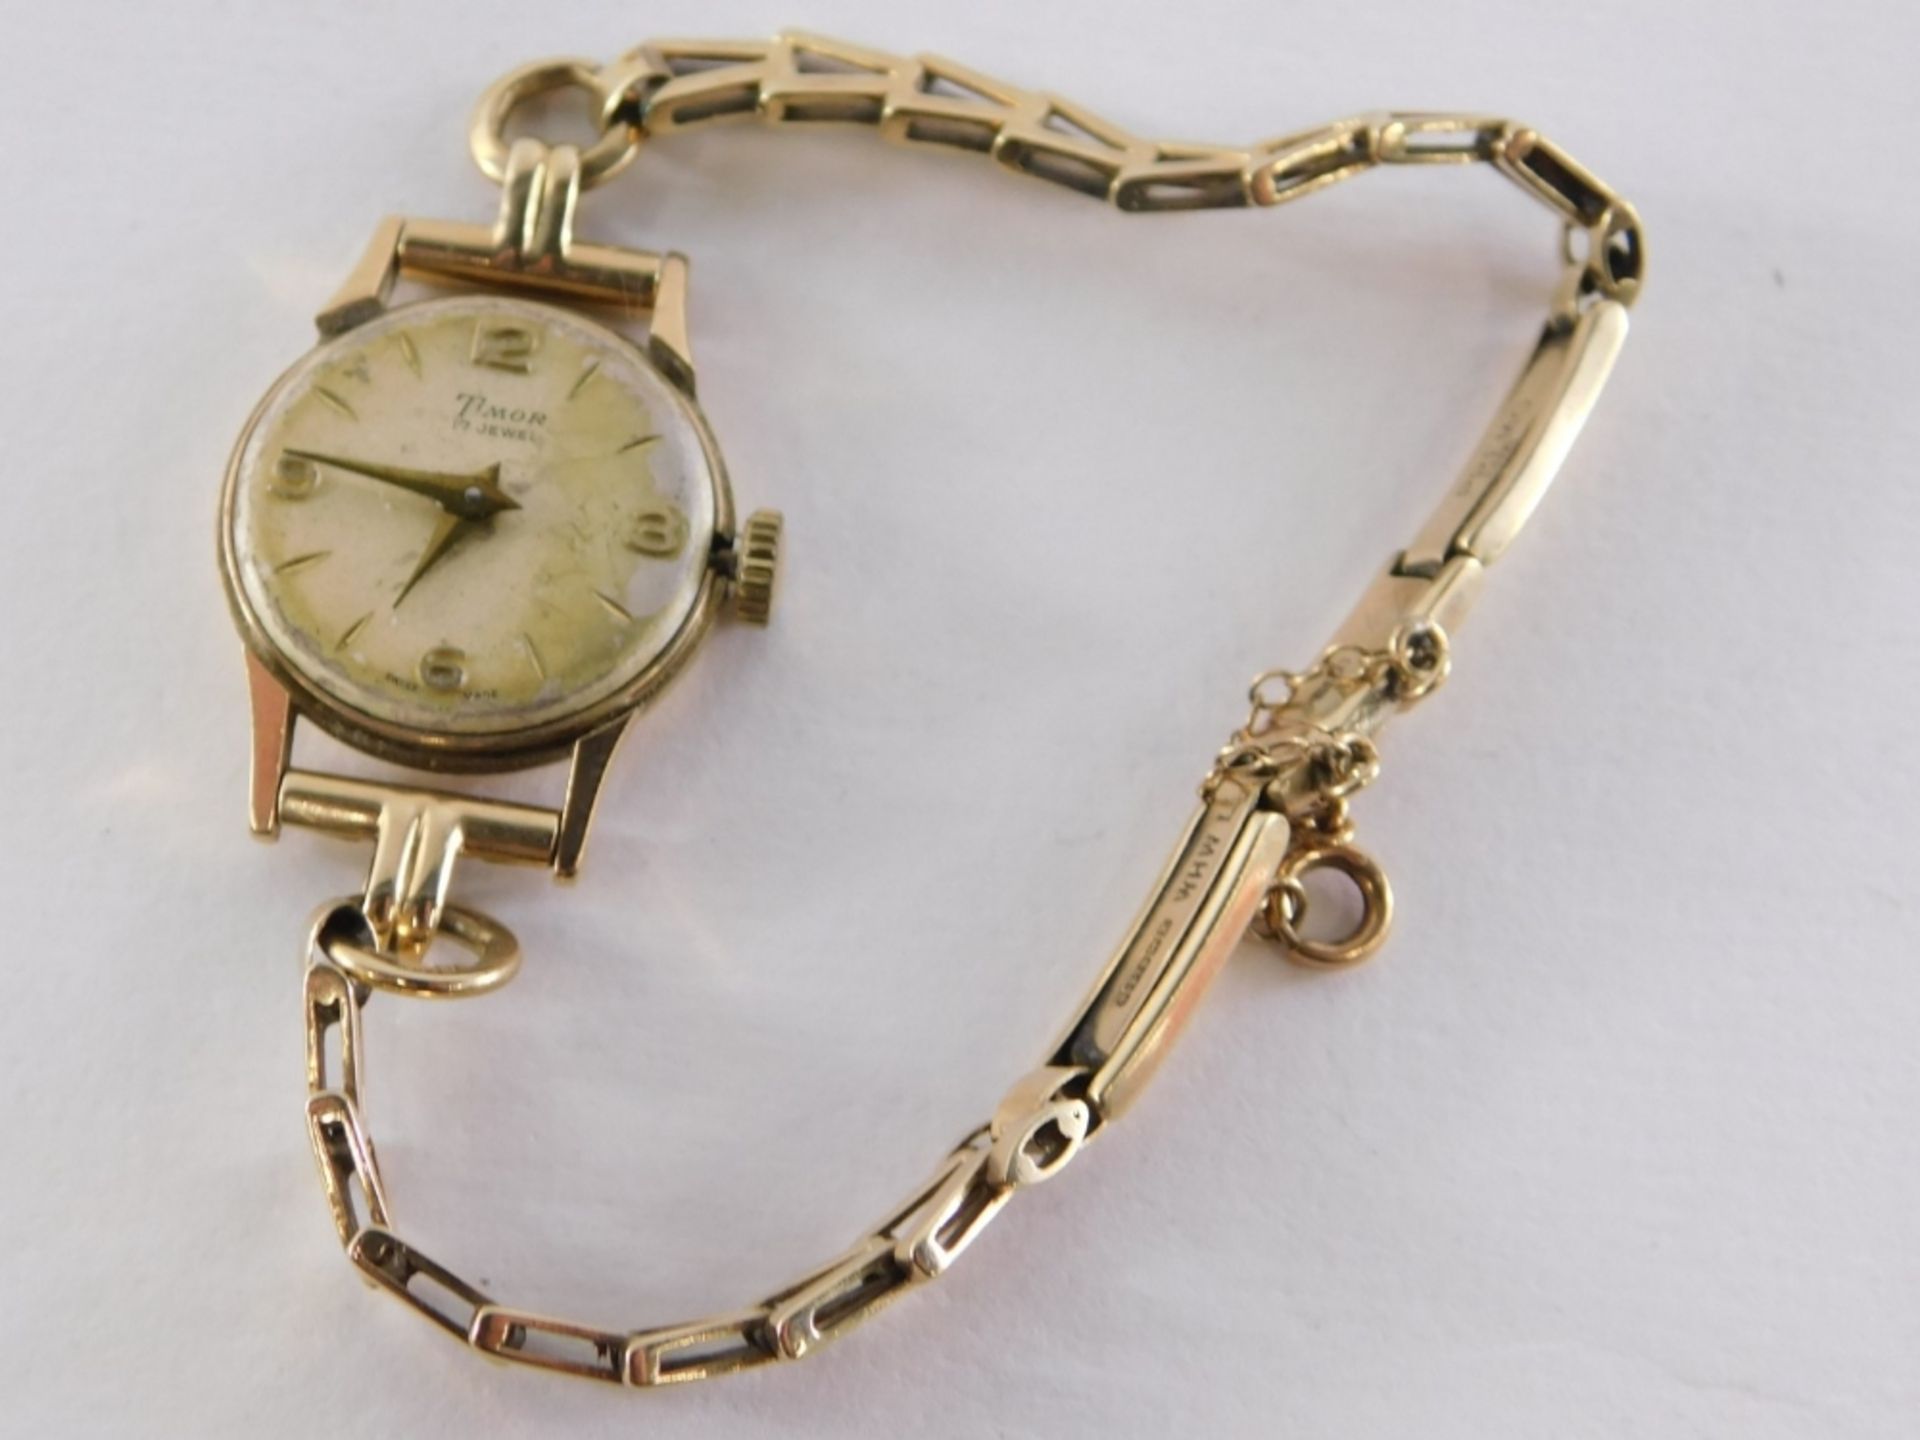 A 9ct gold Timor ladies wristwatch, with V splayed bracelet and safety chain, lacking glass covering - Image 2 of 3